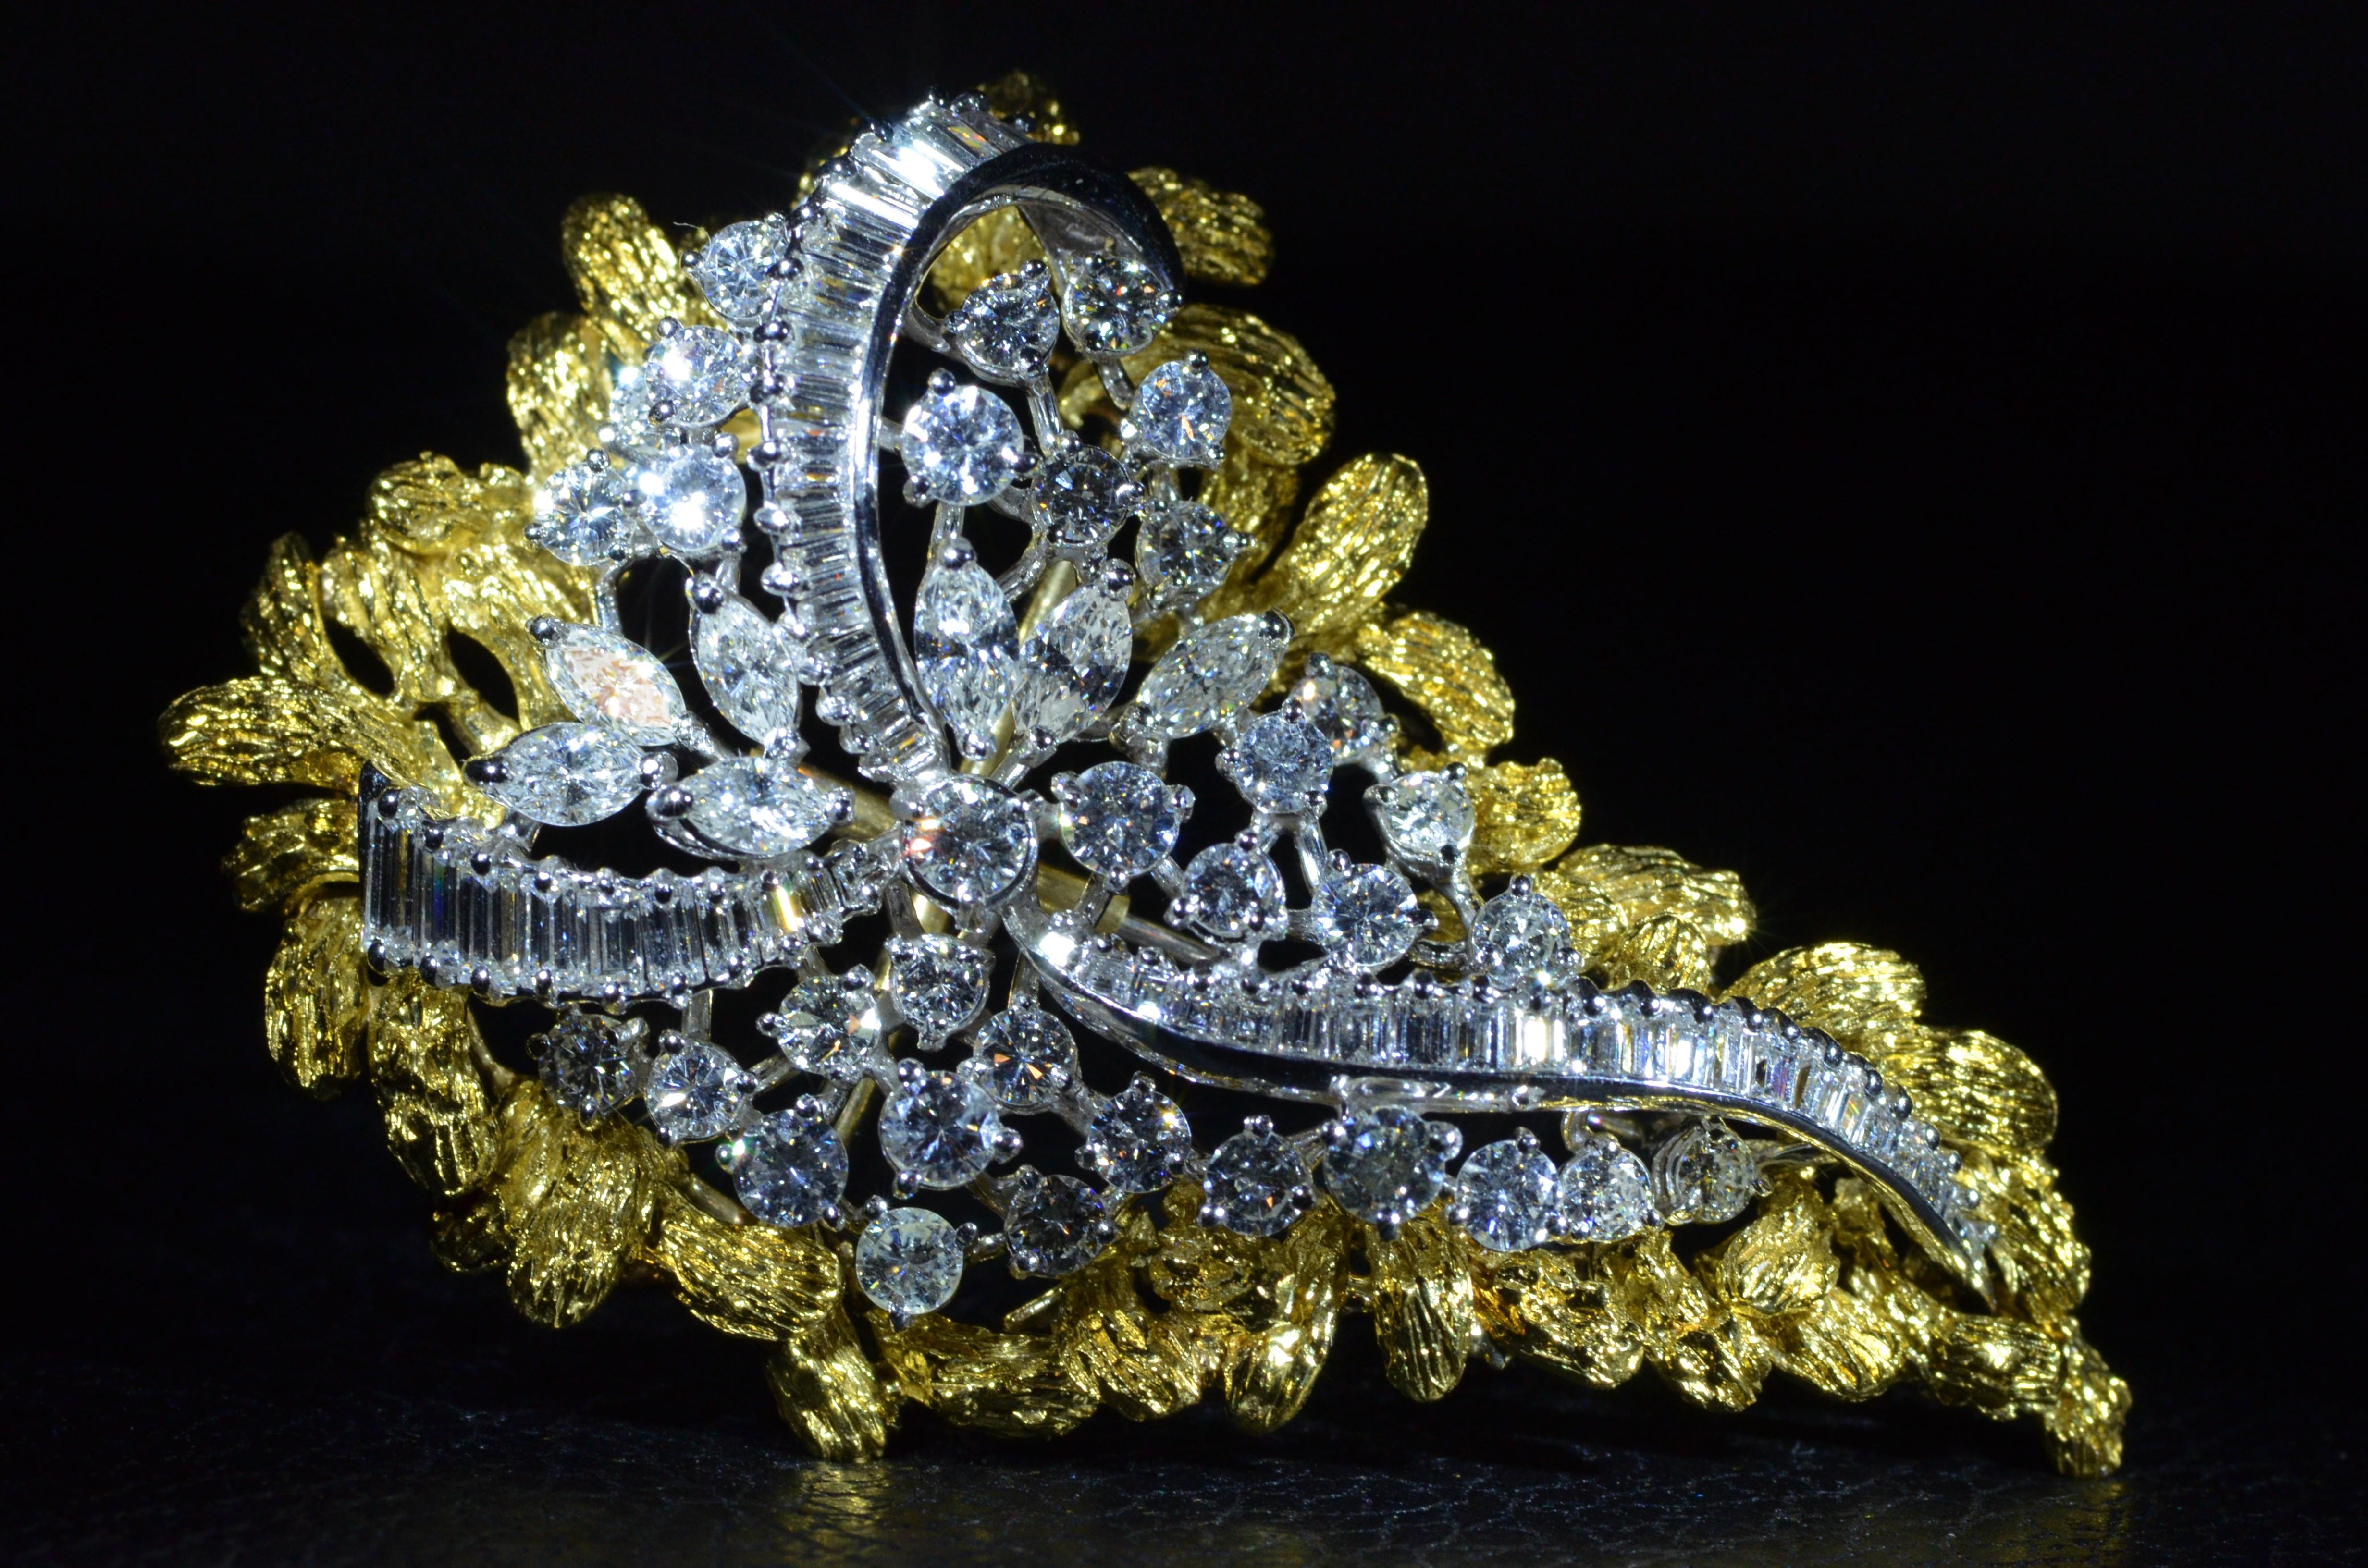 Impressive diamond brooch measuring approximately 2 1/2 inches in length set with approximately 7 1/2 carats in diamonds. The outside 18 Karat yellow gold frame is removable for multiple looks. The brooch can also be worn as a diamond pendant. 